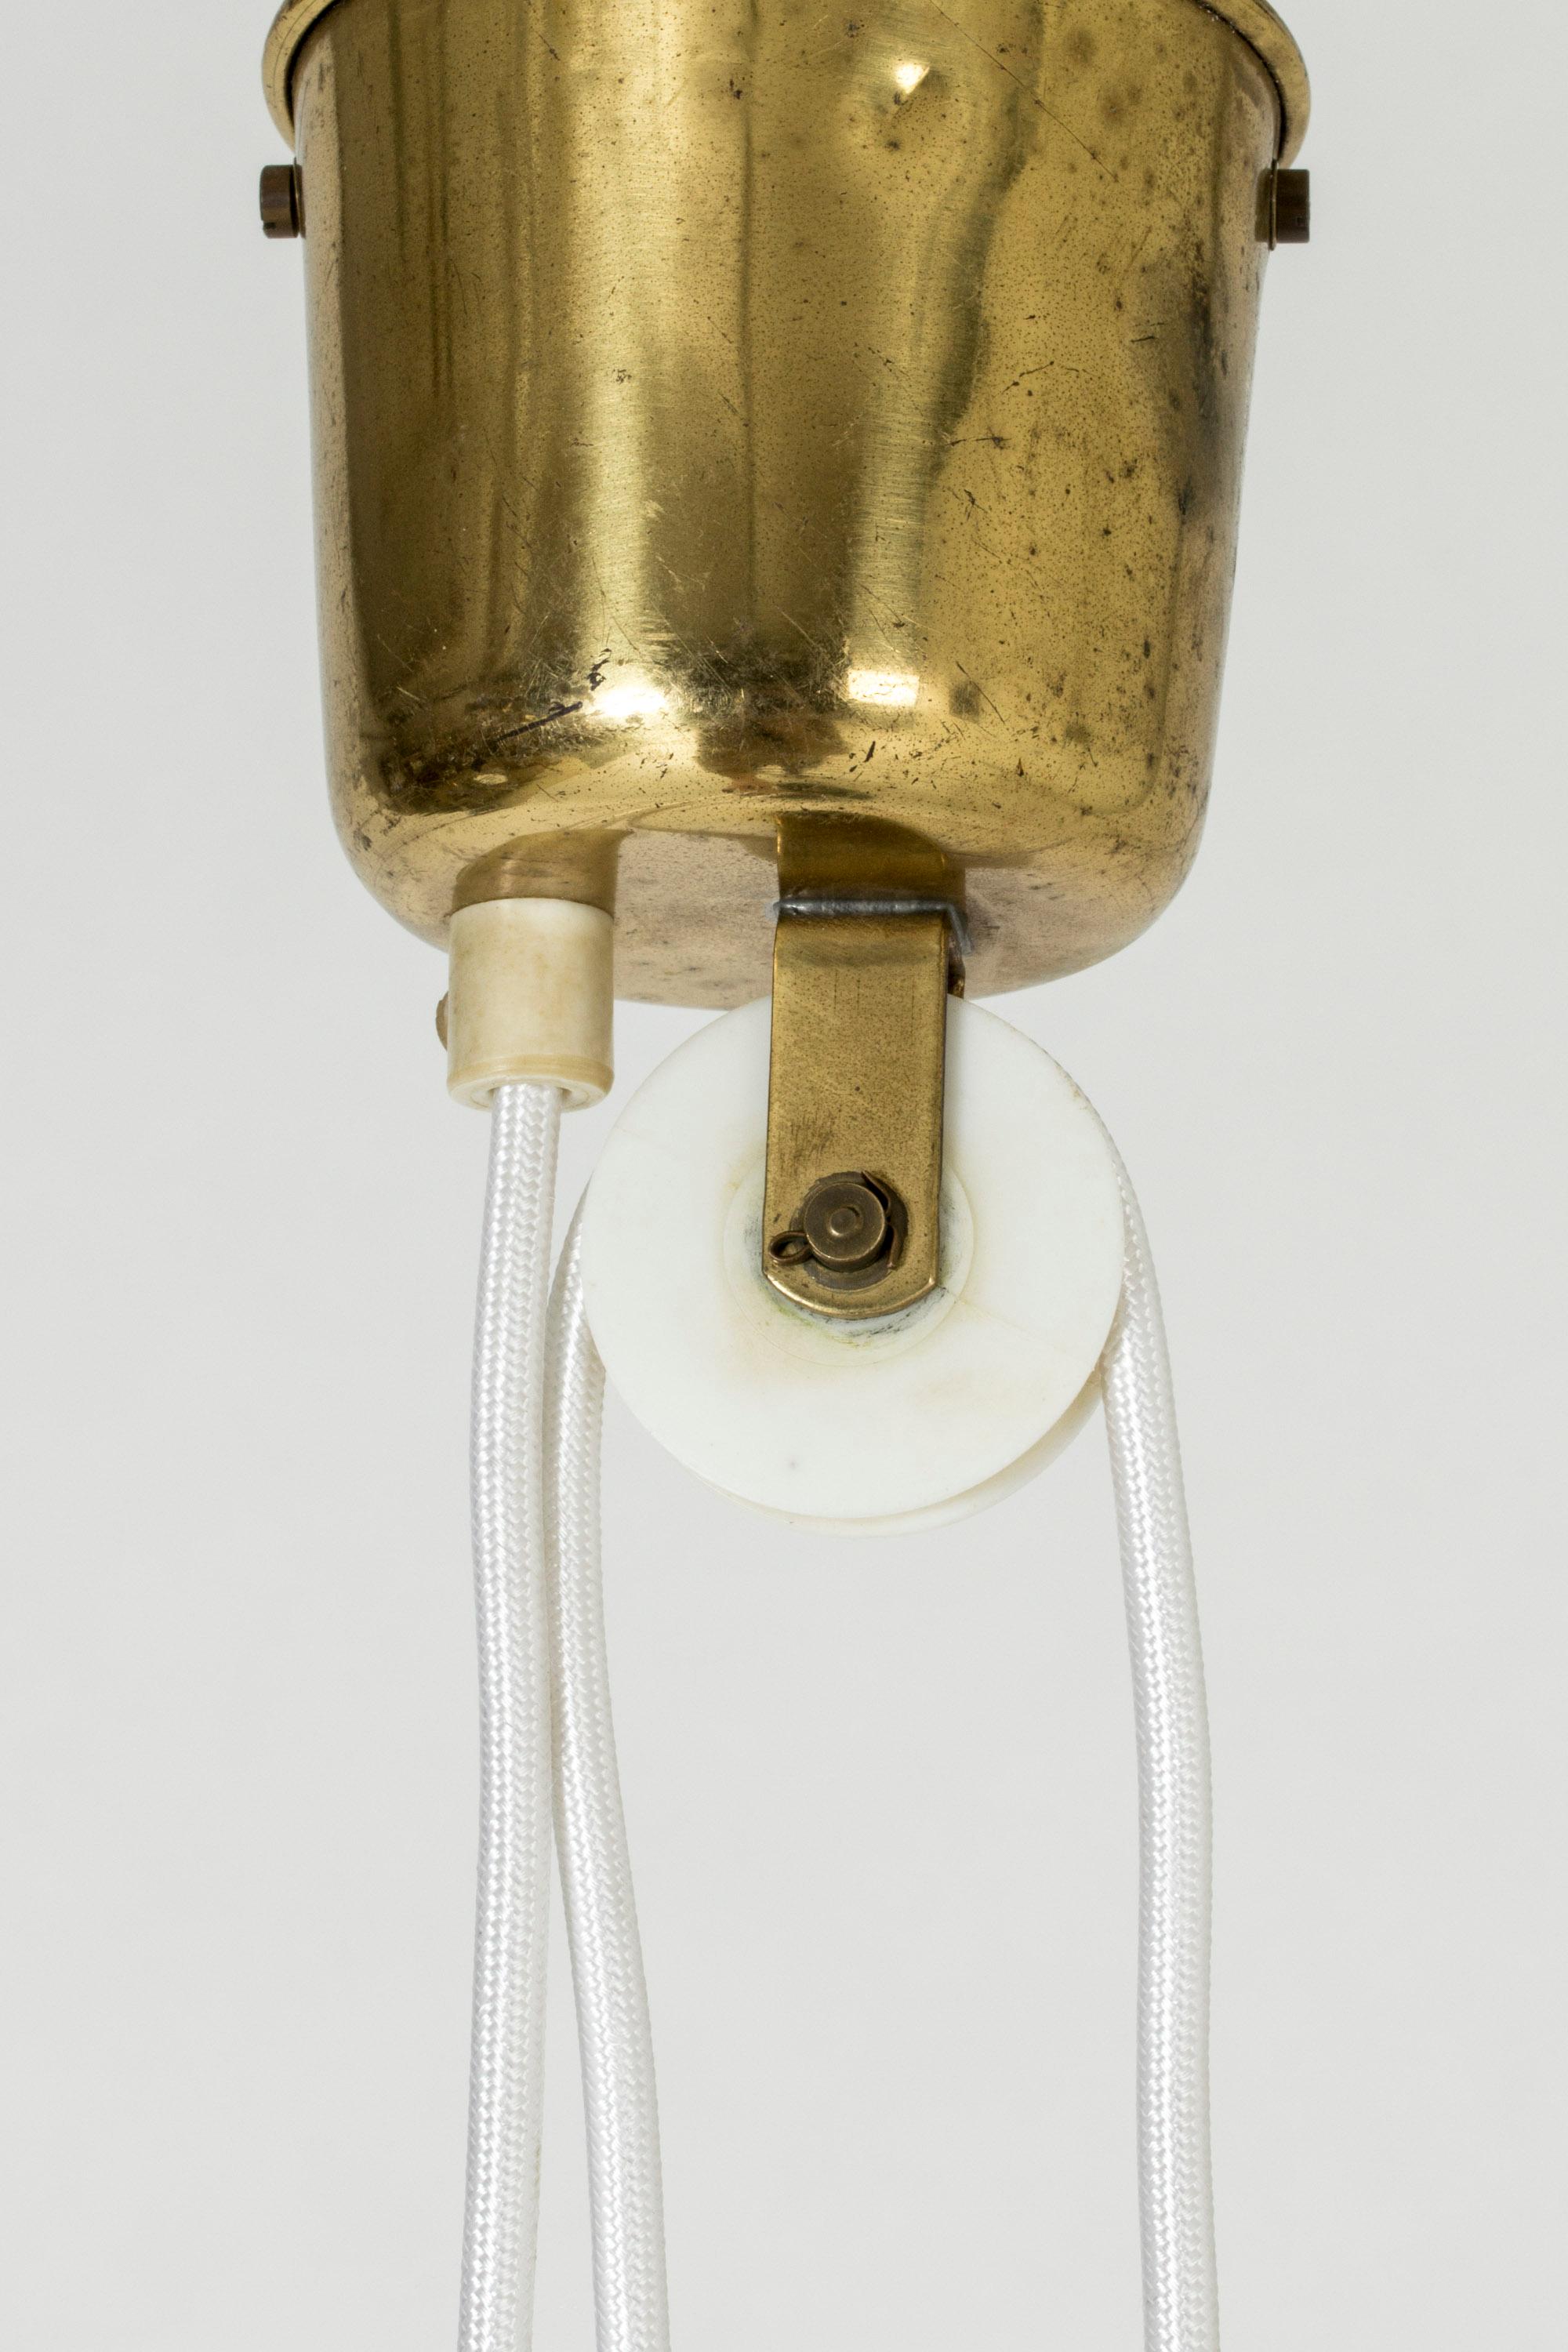 Brass Ceiling Lamp by Lisa Johansson-Pape for Orno, Finland, 1950s